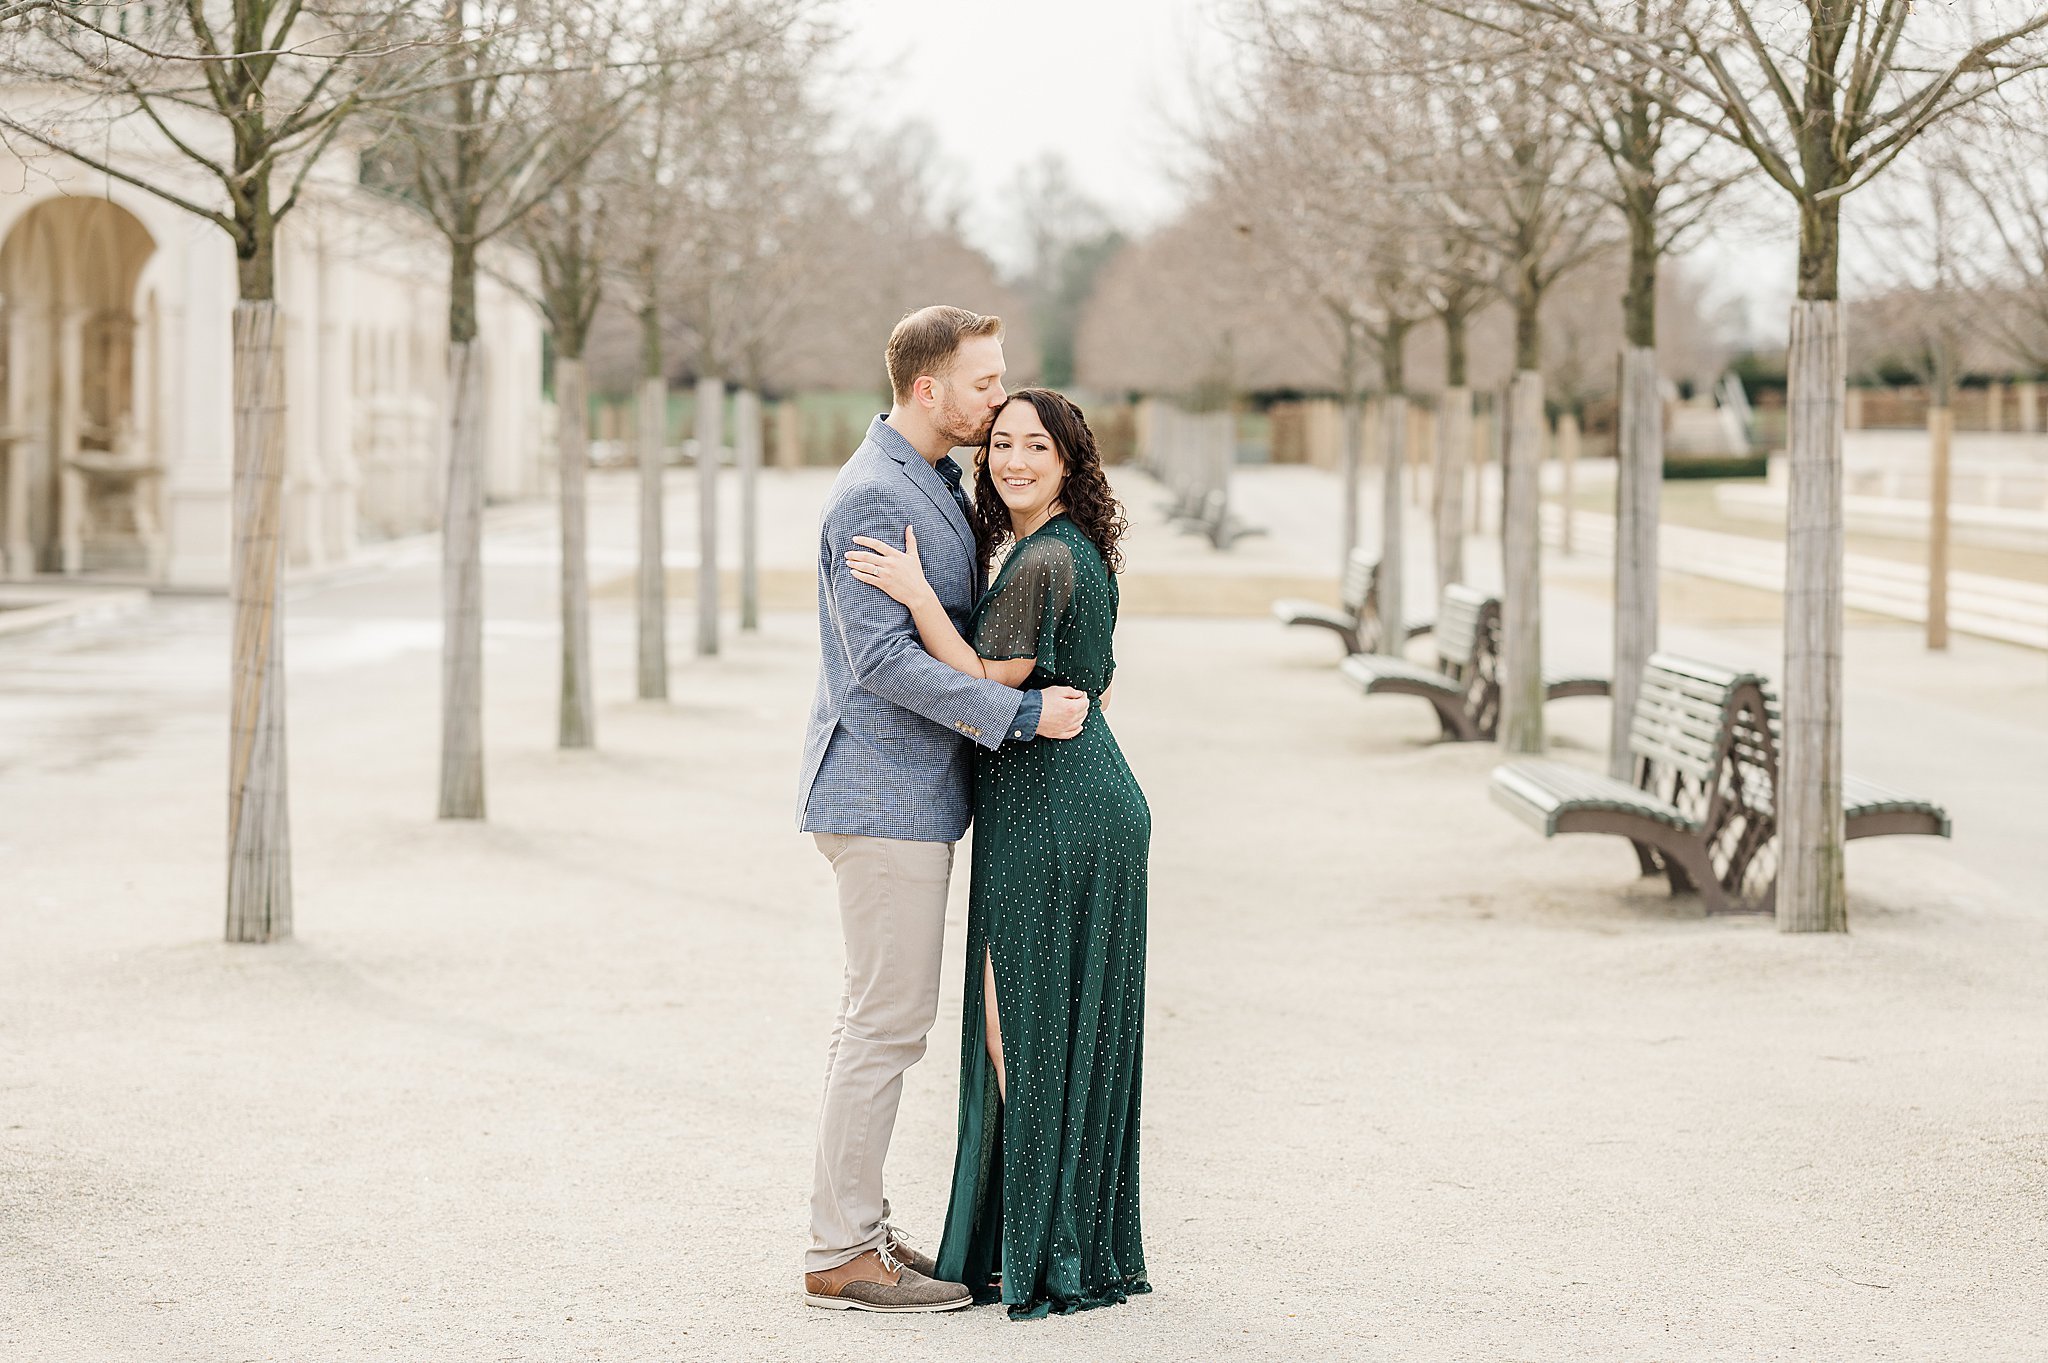 Longwood Gardens Winter Engagement Session Photography Session_4150.jpg